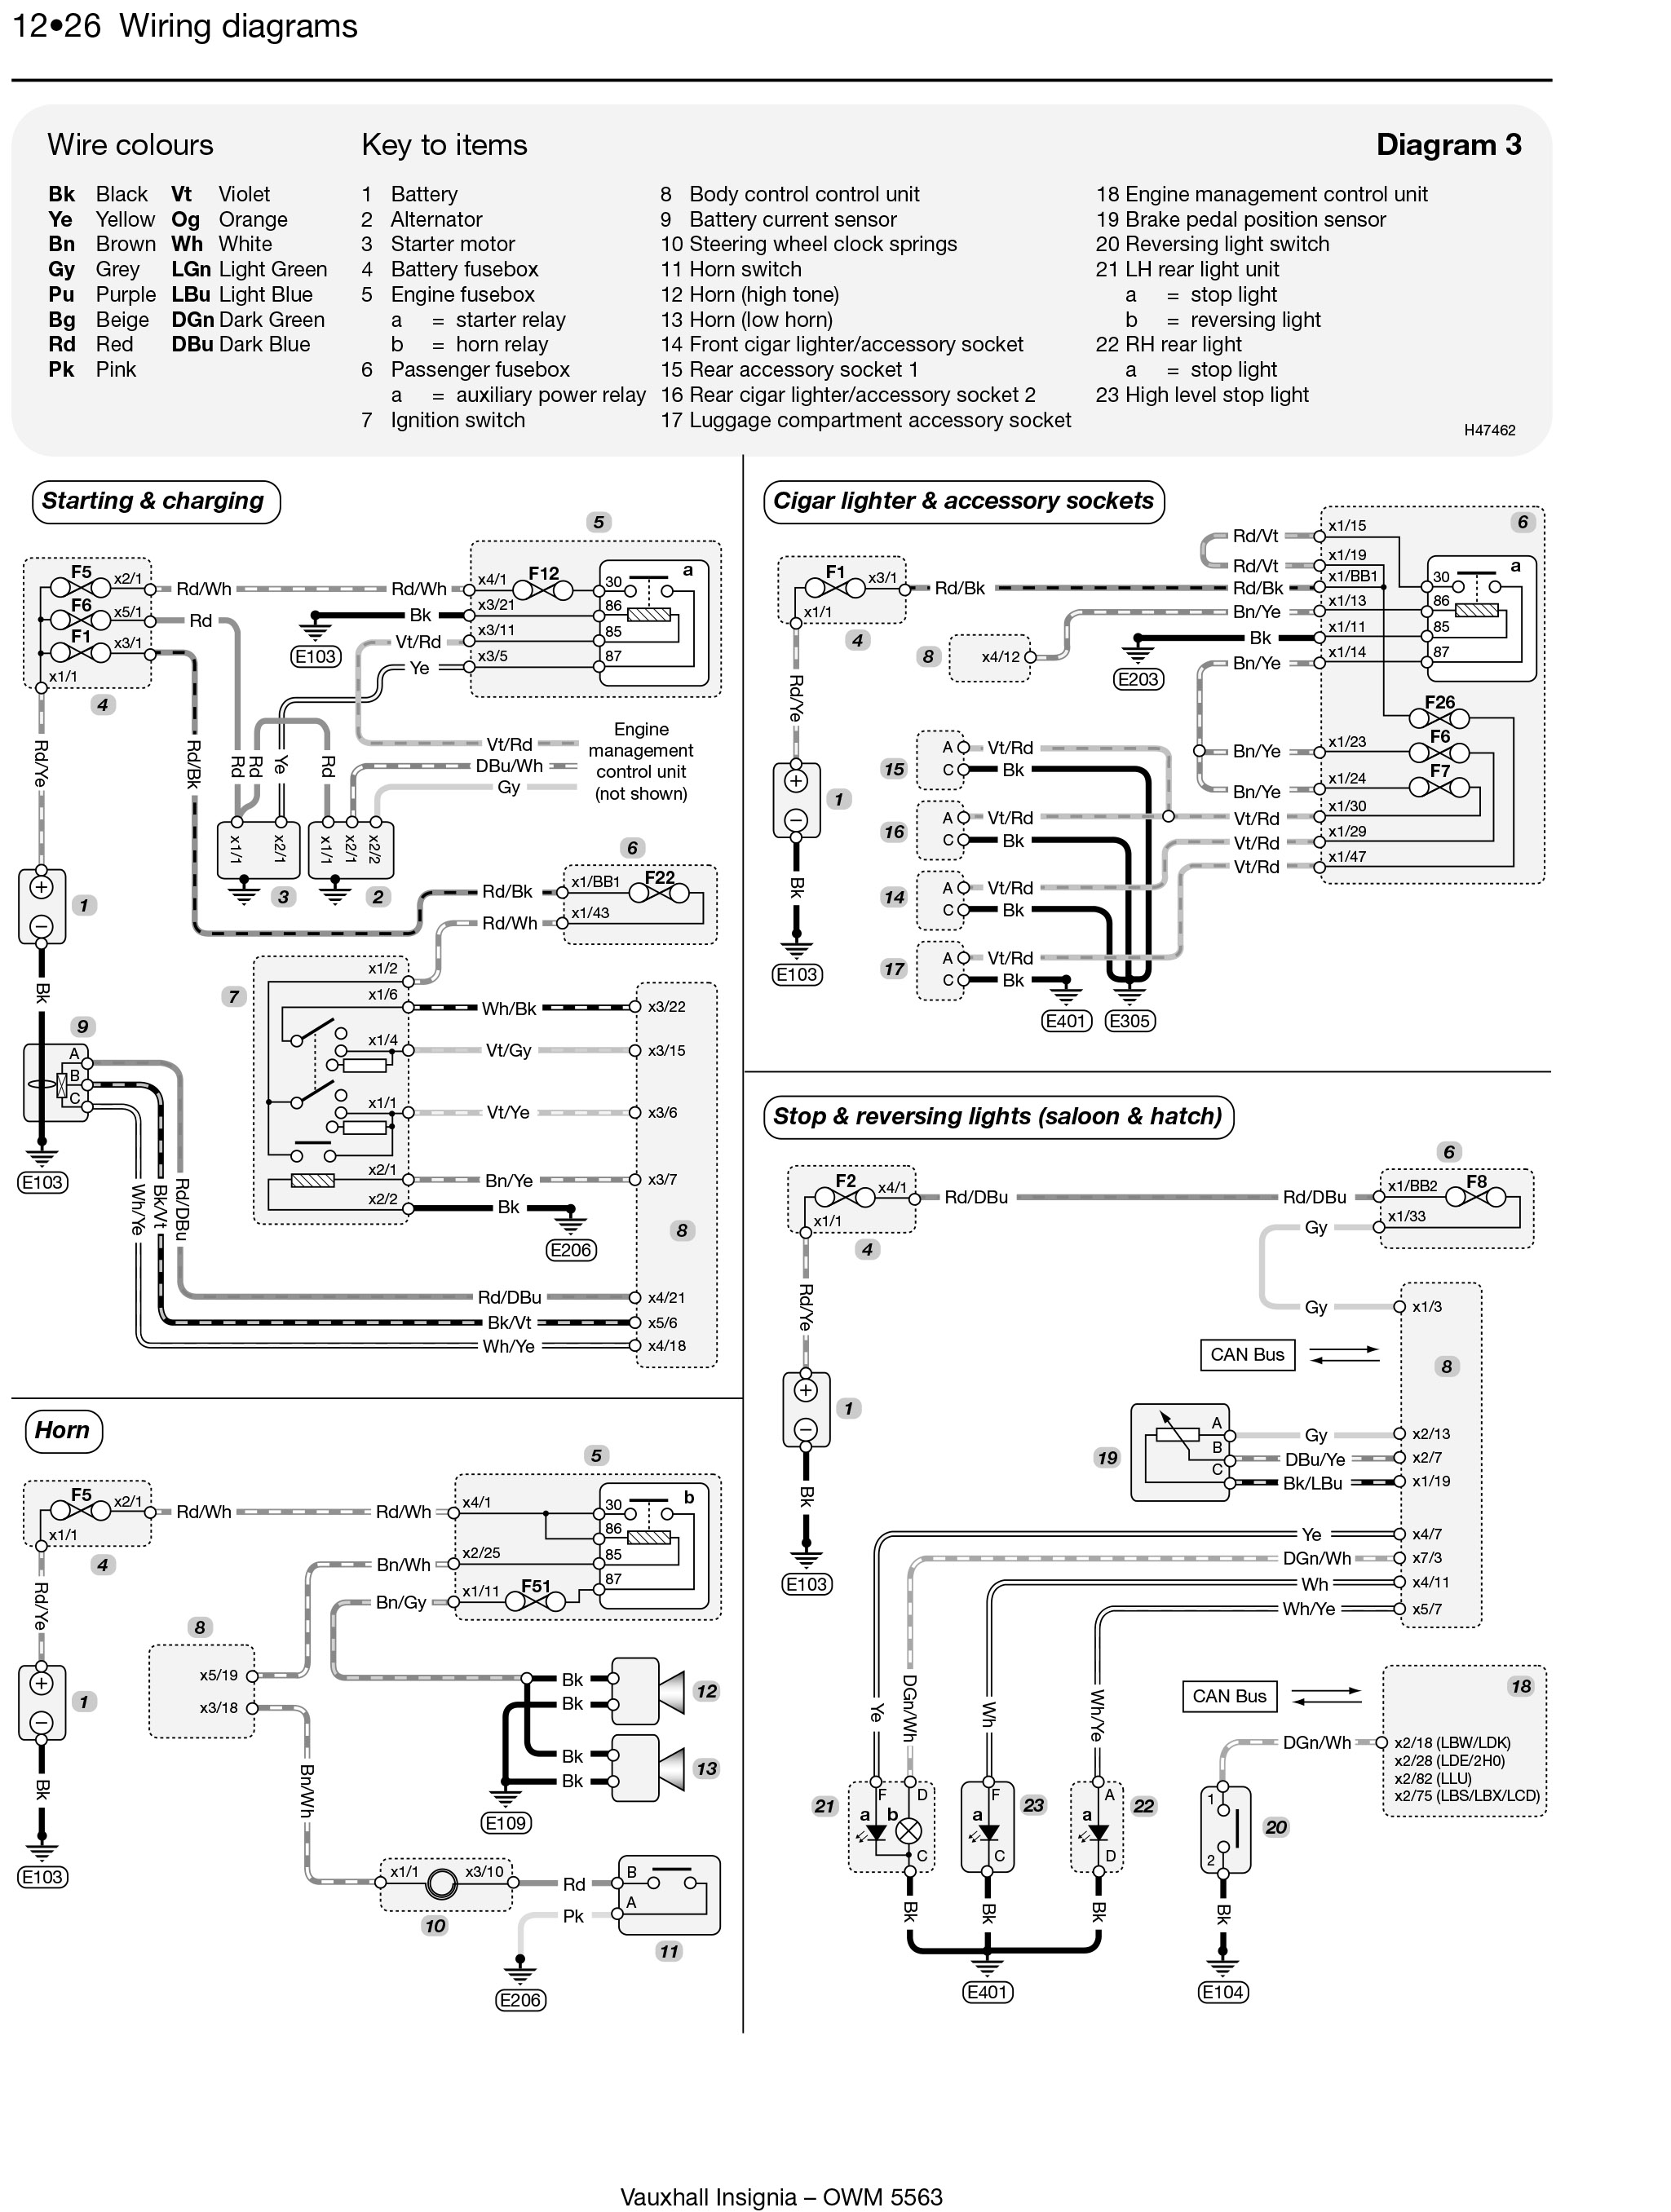 wiring diagram for century g85 and safety shut off